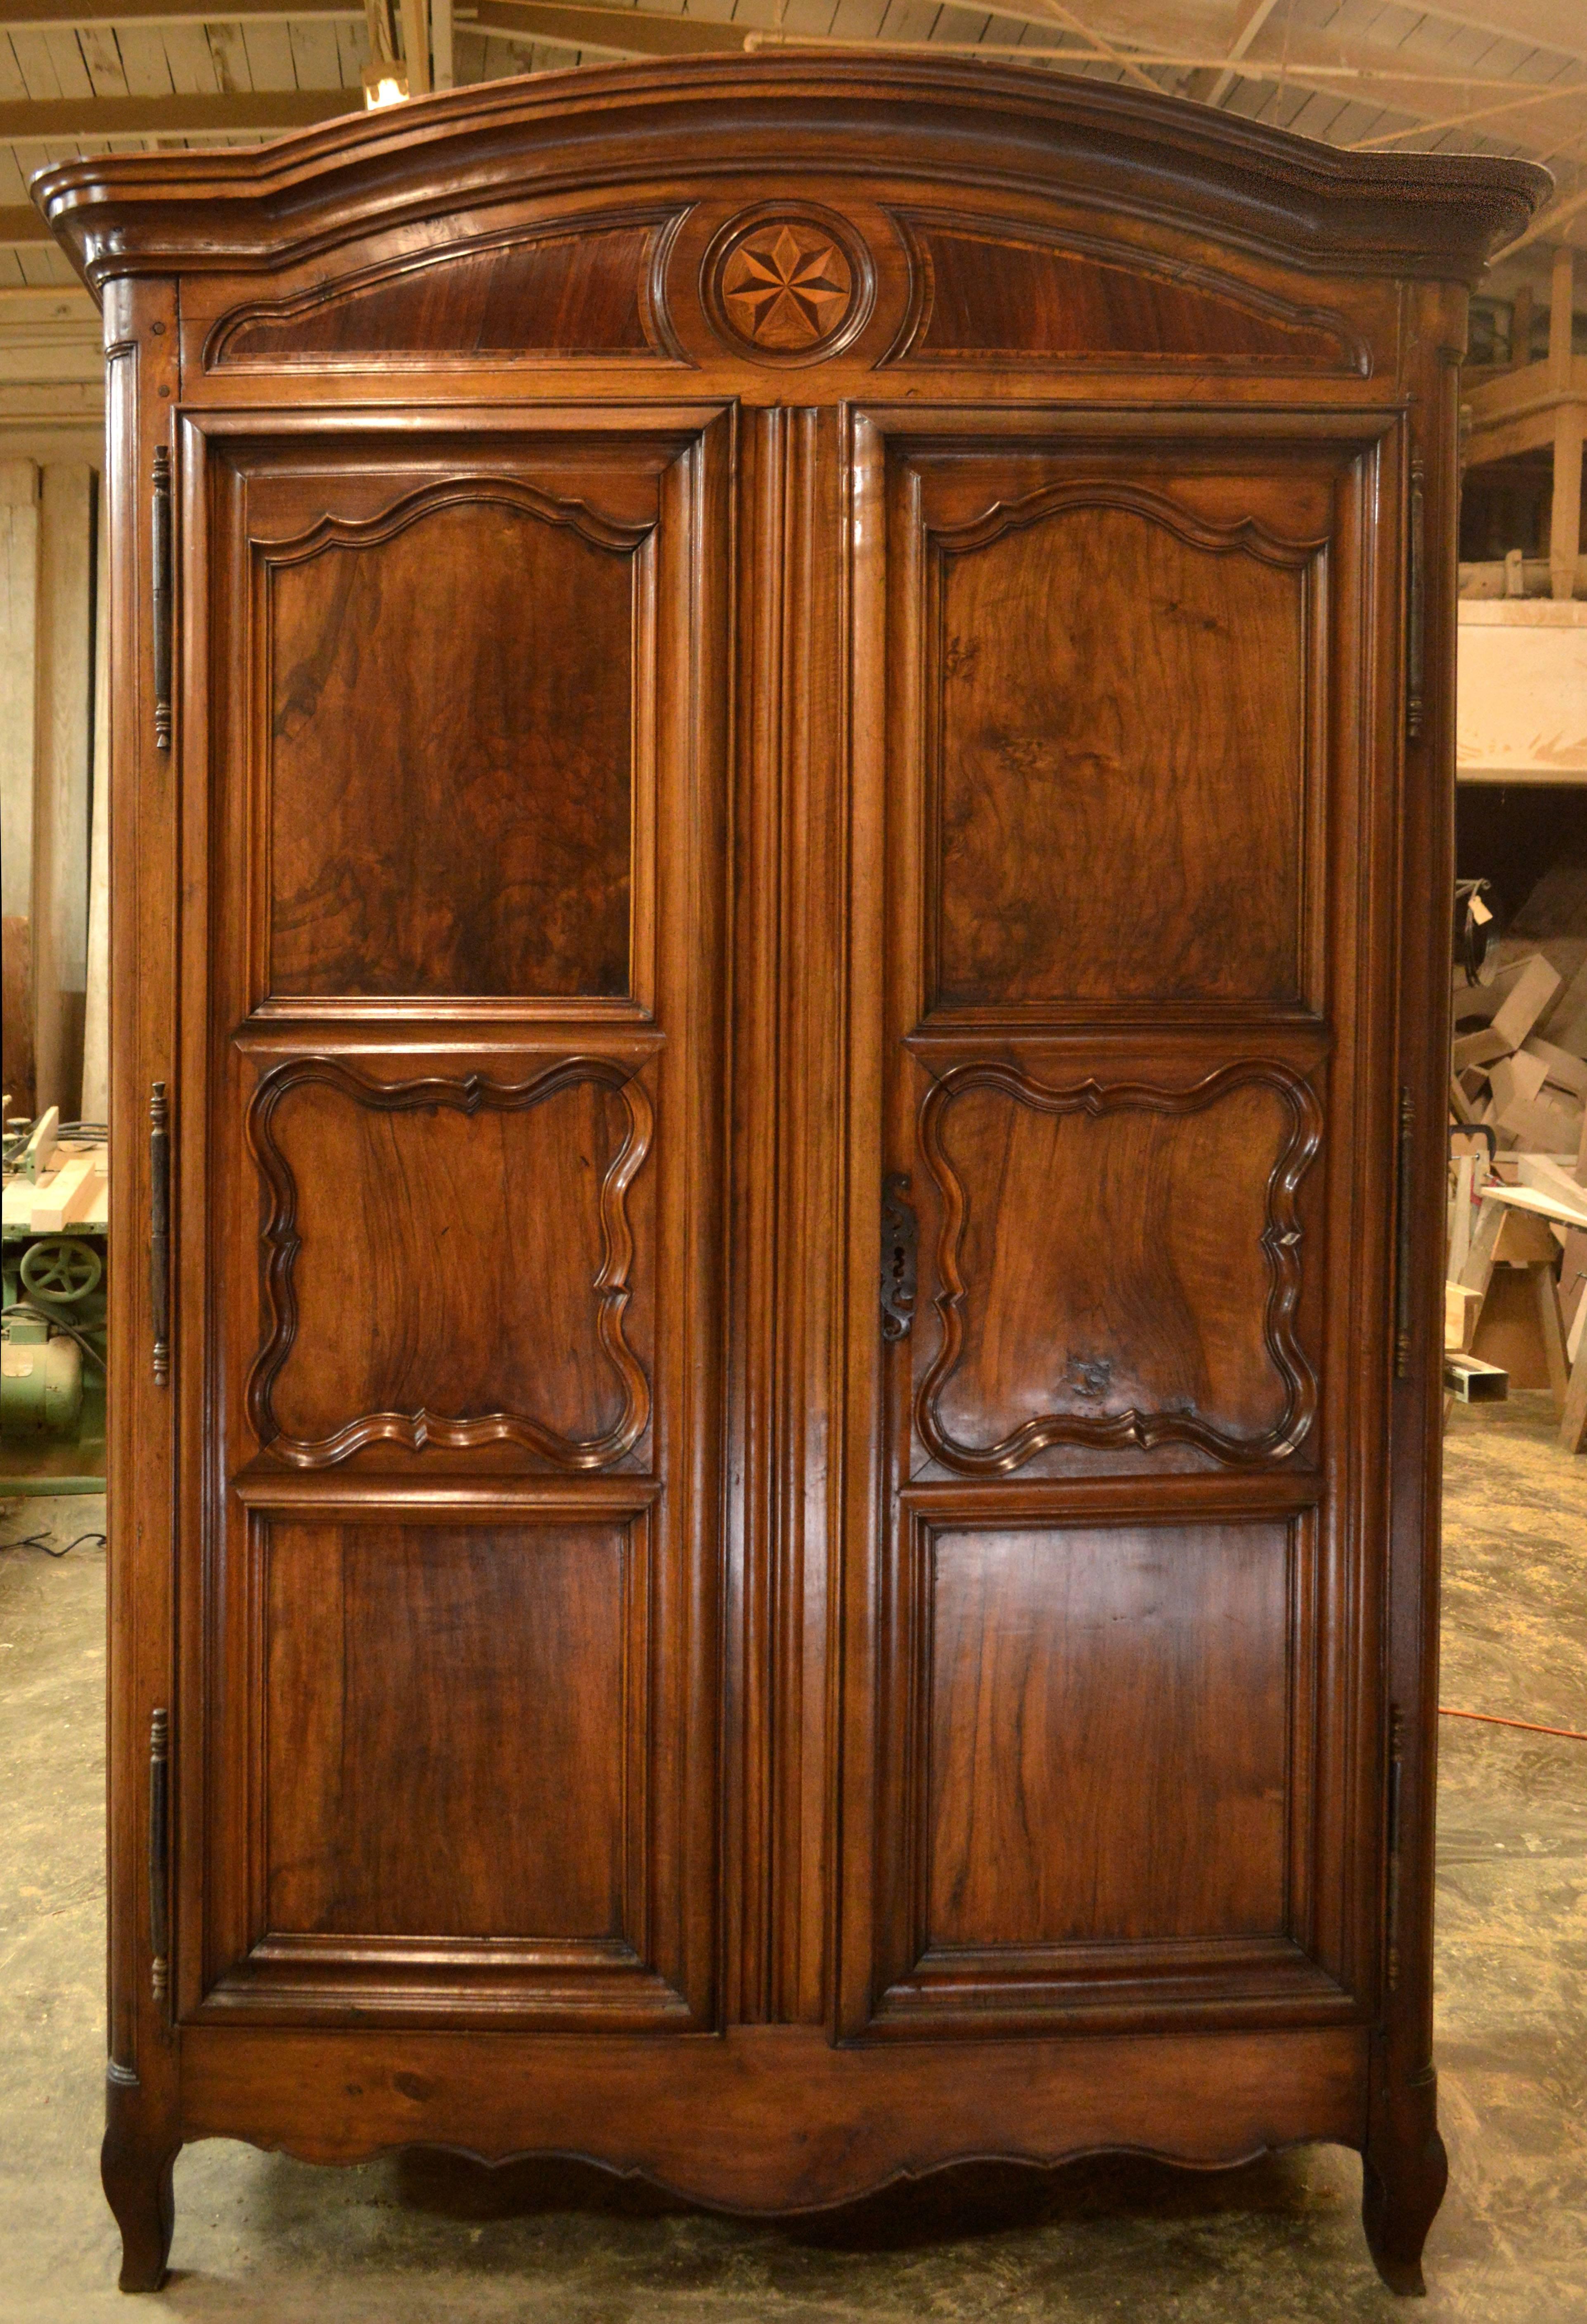 Excellent French Louis XV period armoire built with book matched panels. This is a monumental piece!